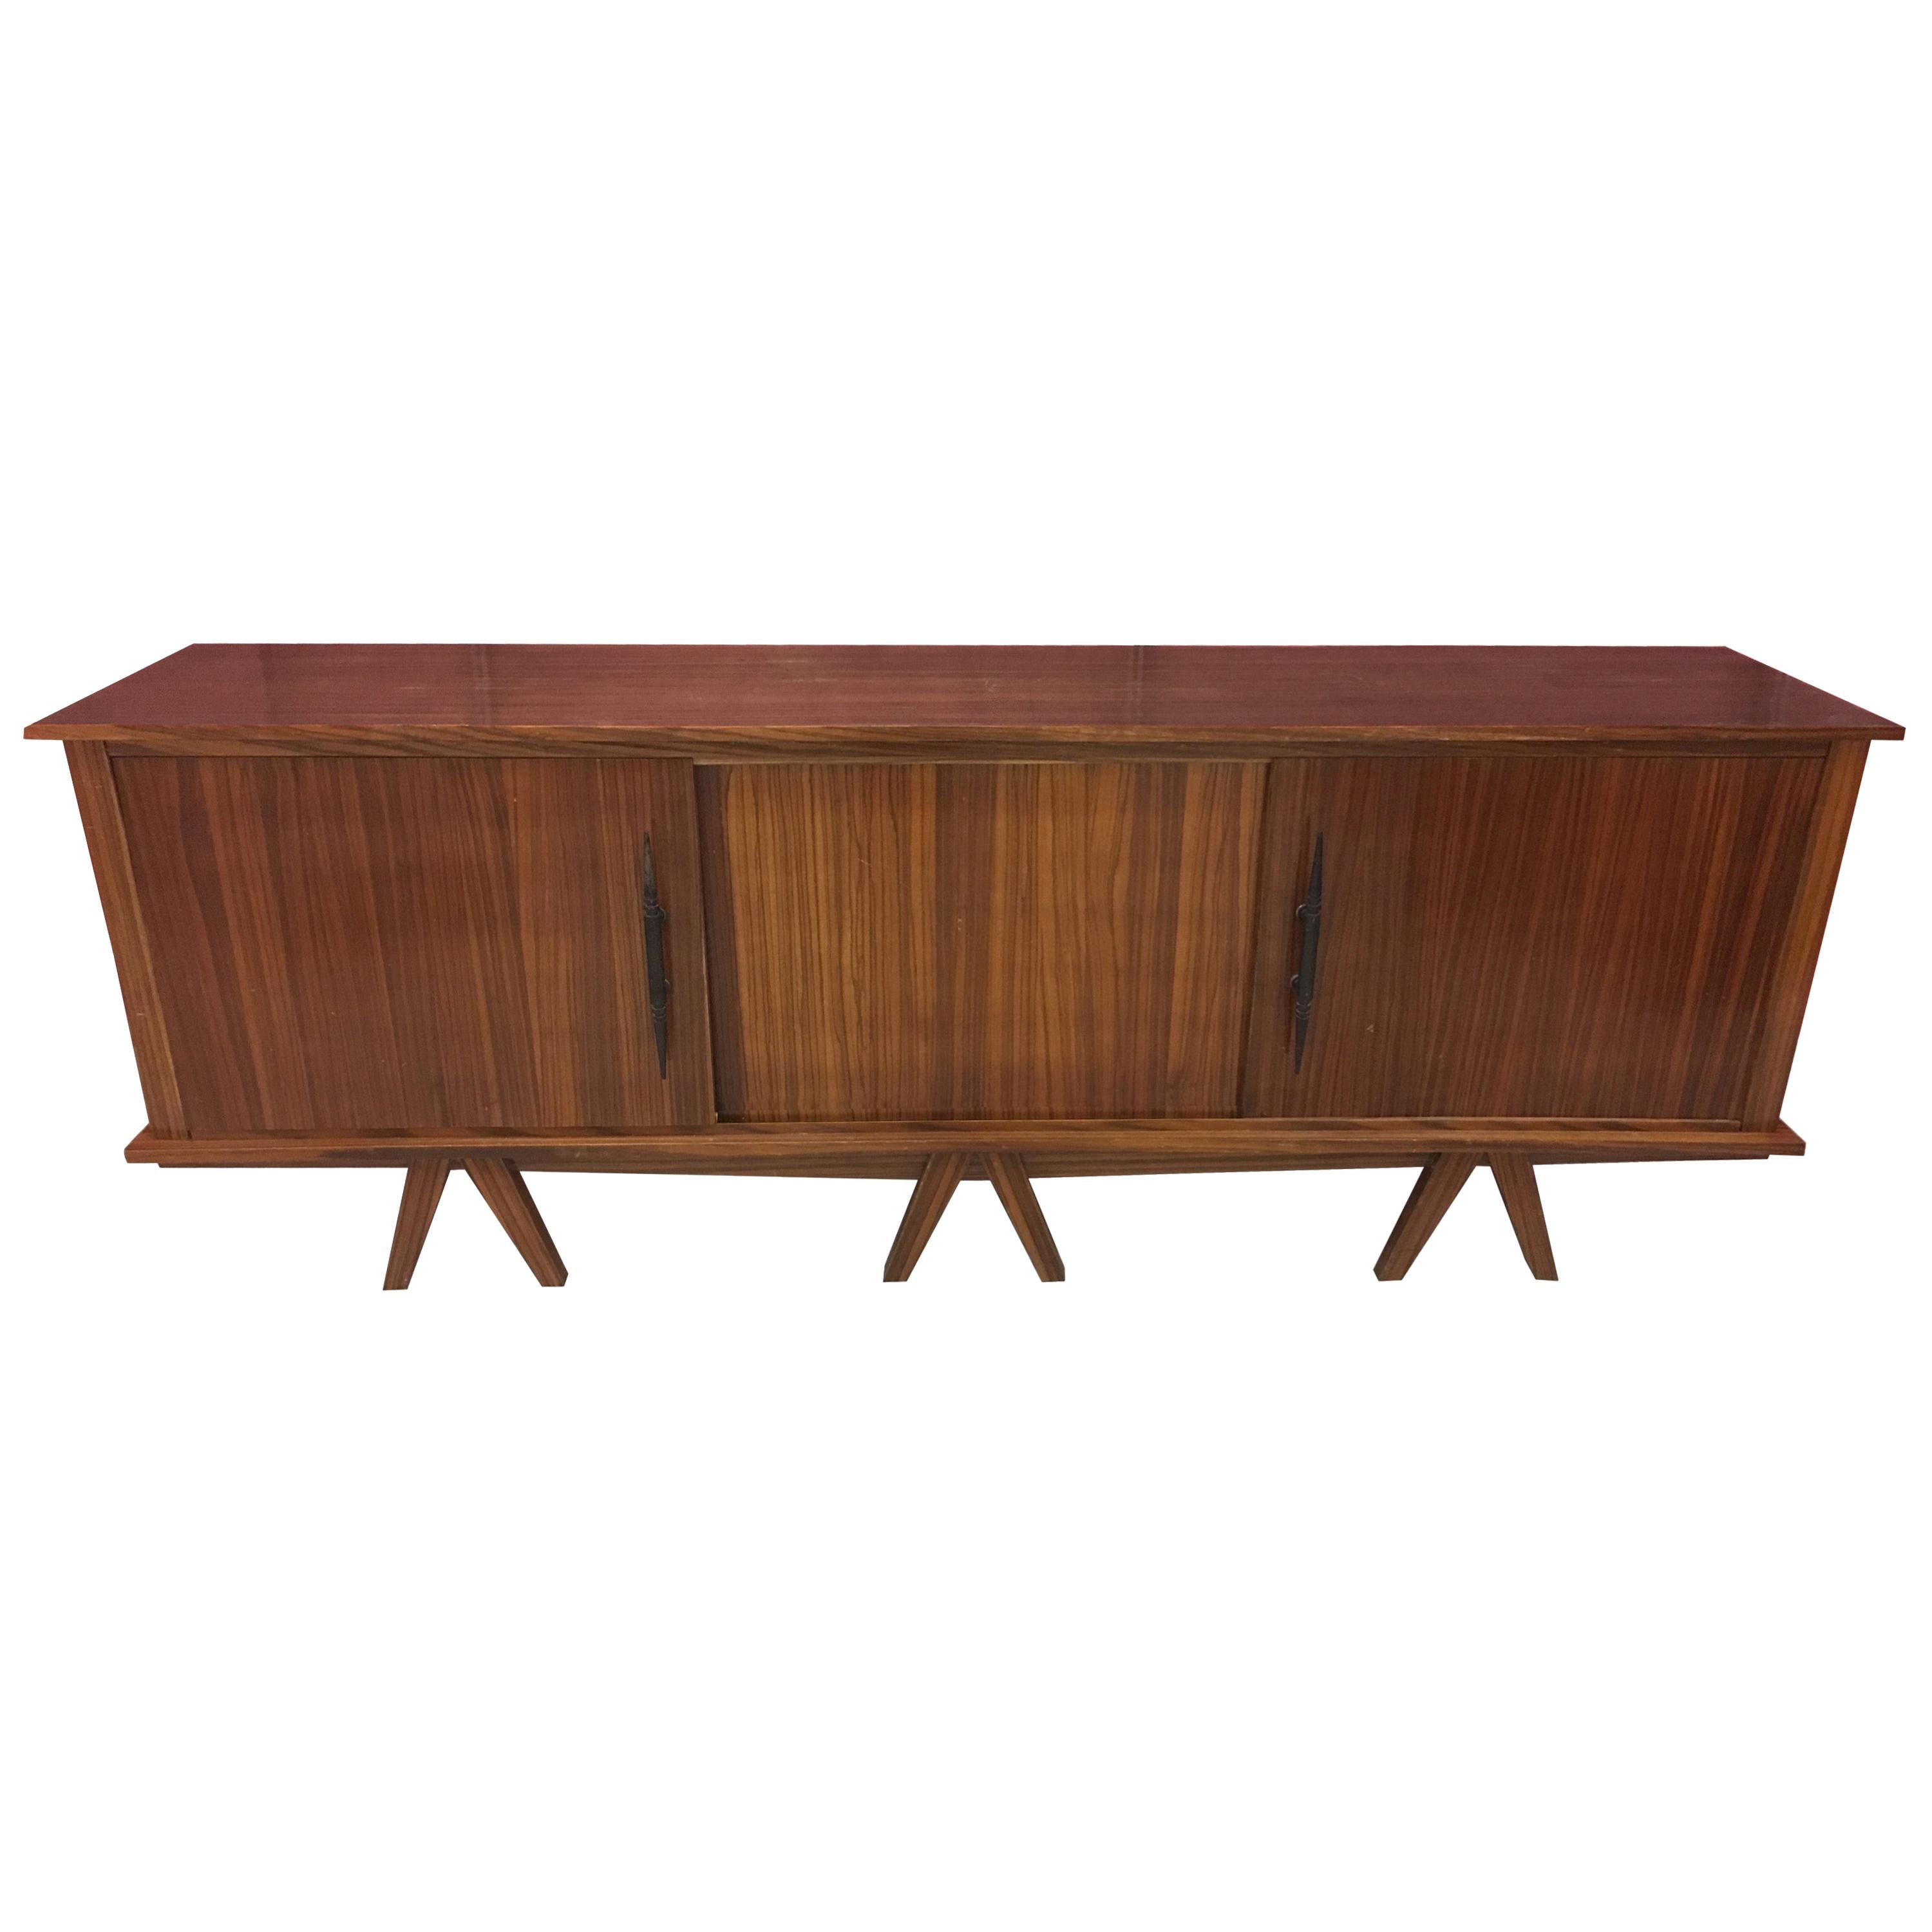  Zebra Wood and wrought iron brutalist Sideboard circa 1950 For Sale